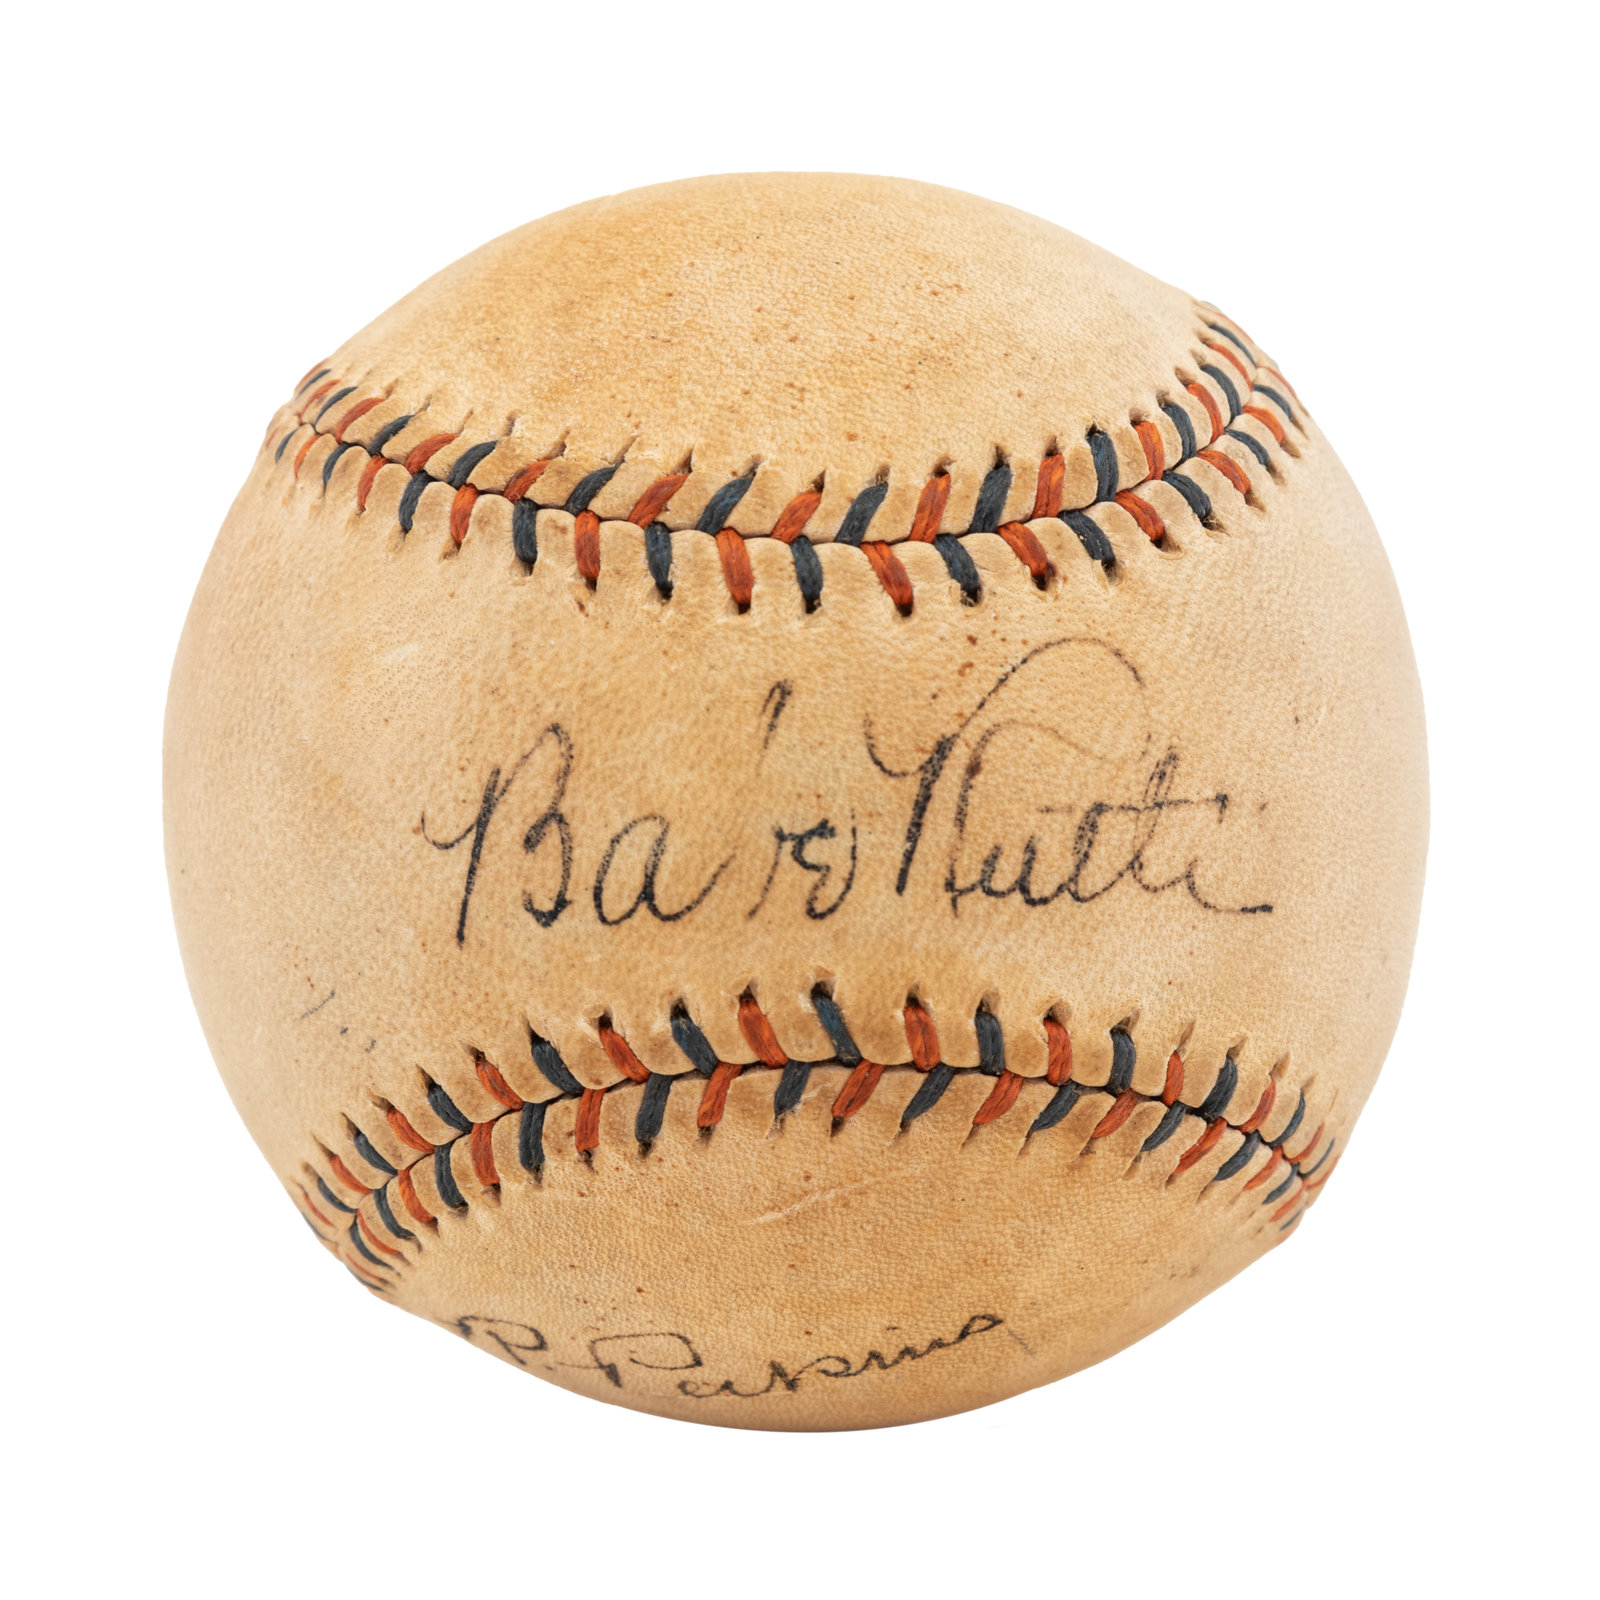 Sold at Auction: Lou Gehrig, LOU GEHRIG New York Yankees 'Iron Horse'  Original Signature